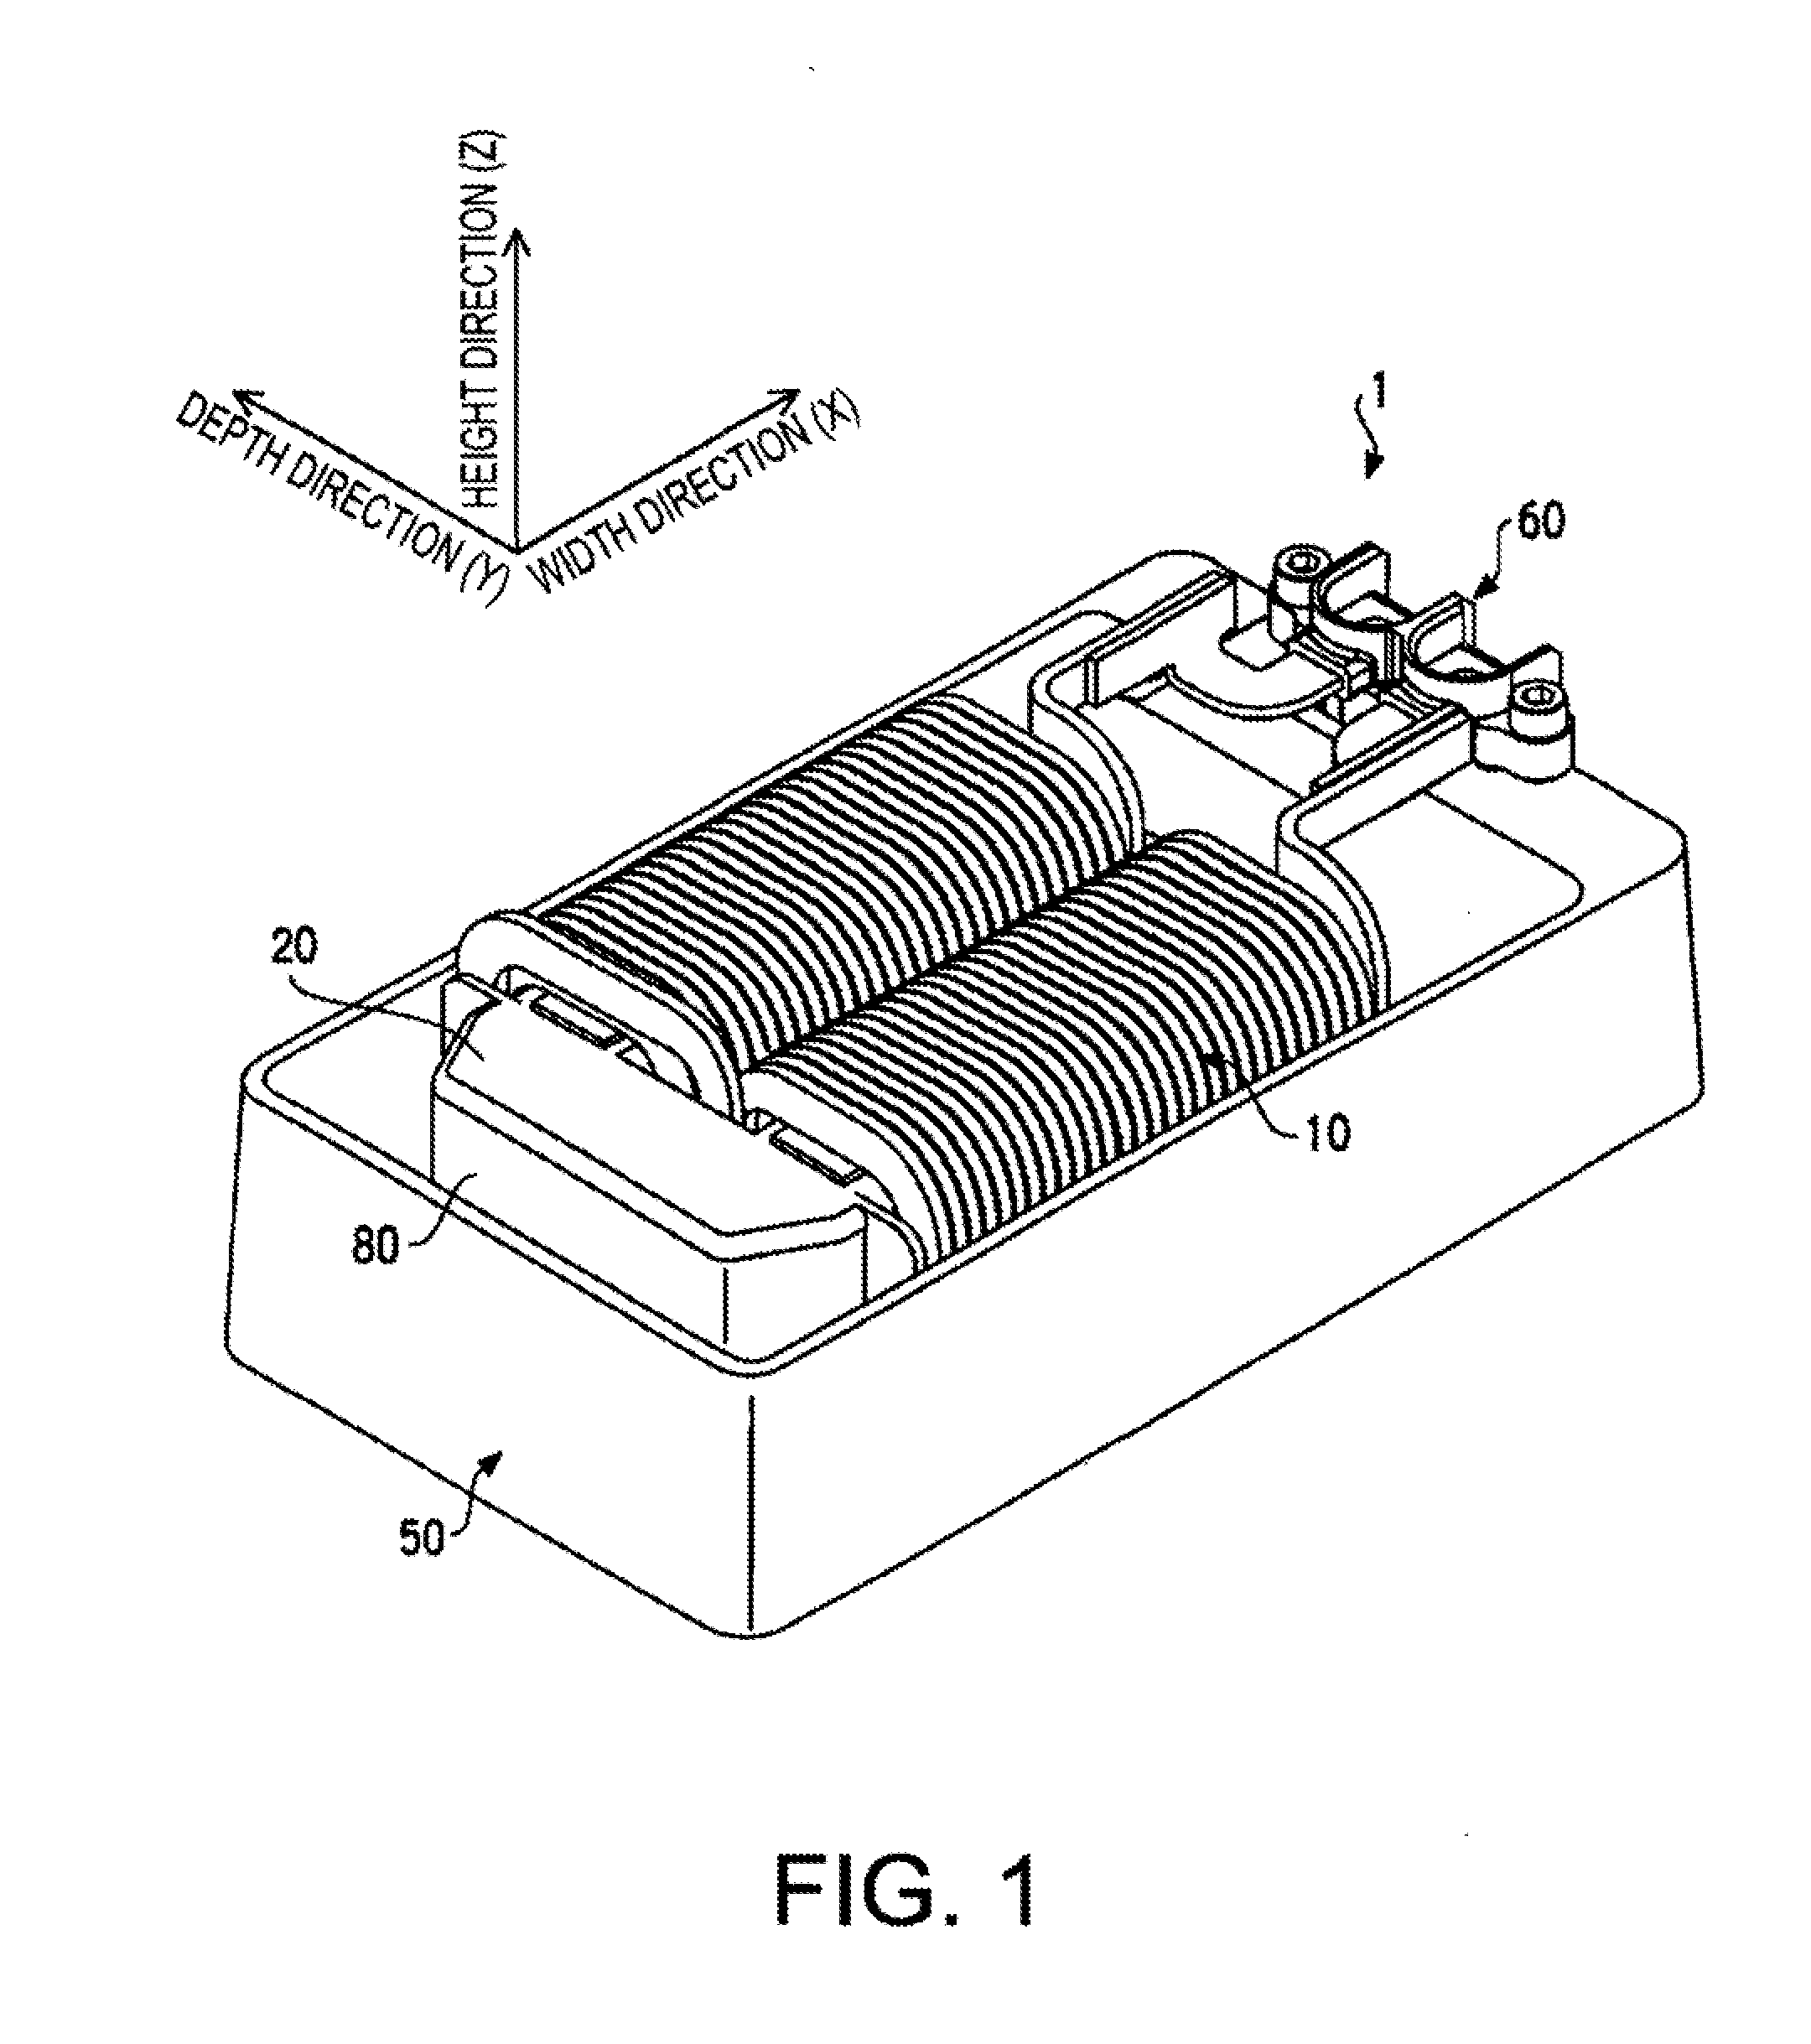 Core fixing member and coil device